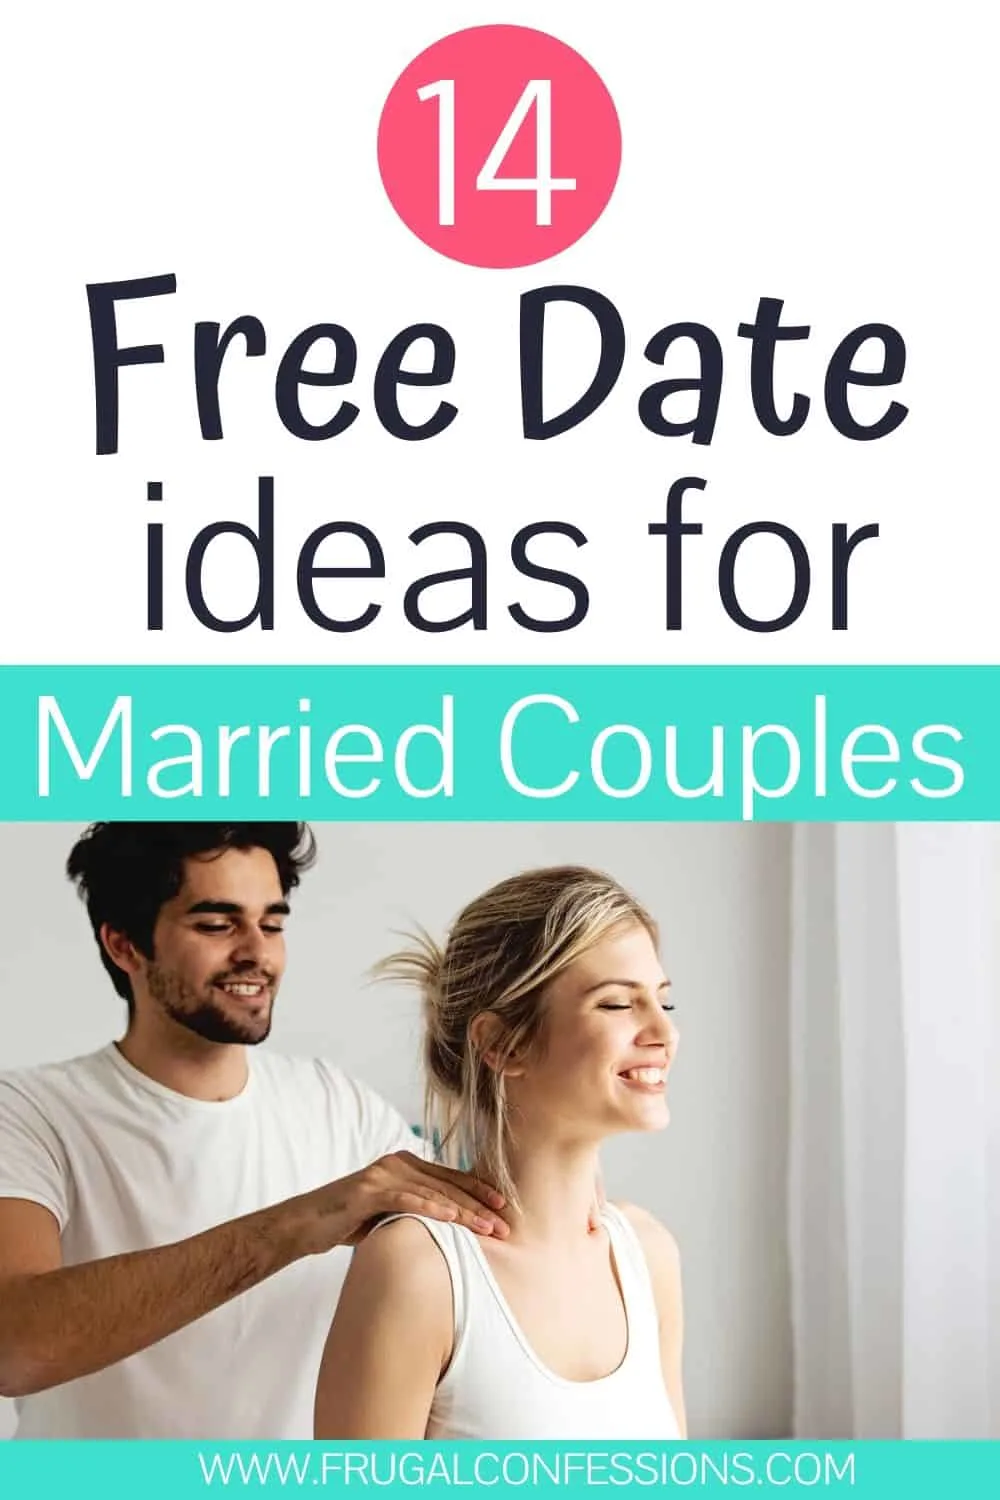 41 Free Date Ideas for Married Couples At Home (Romantic + Fun) photo